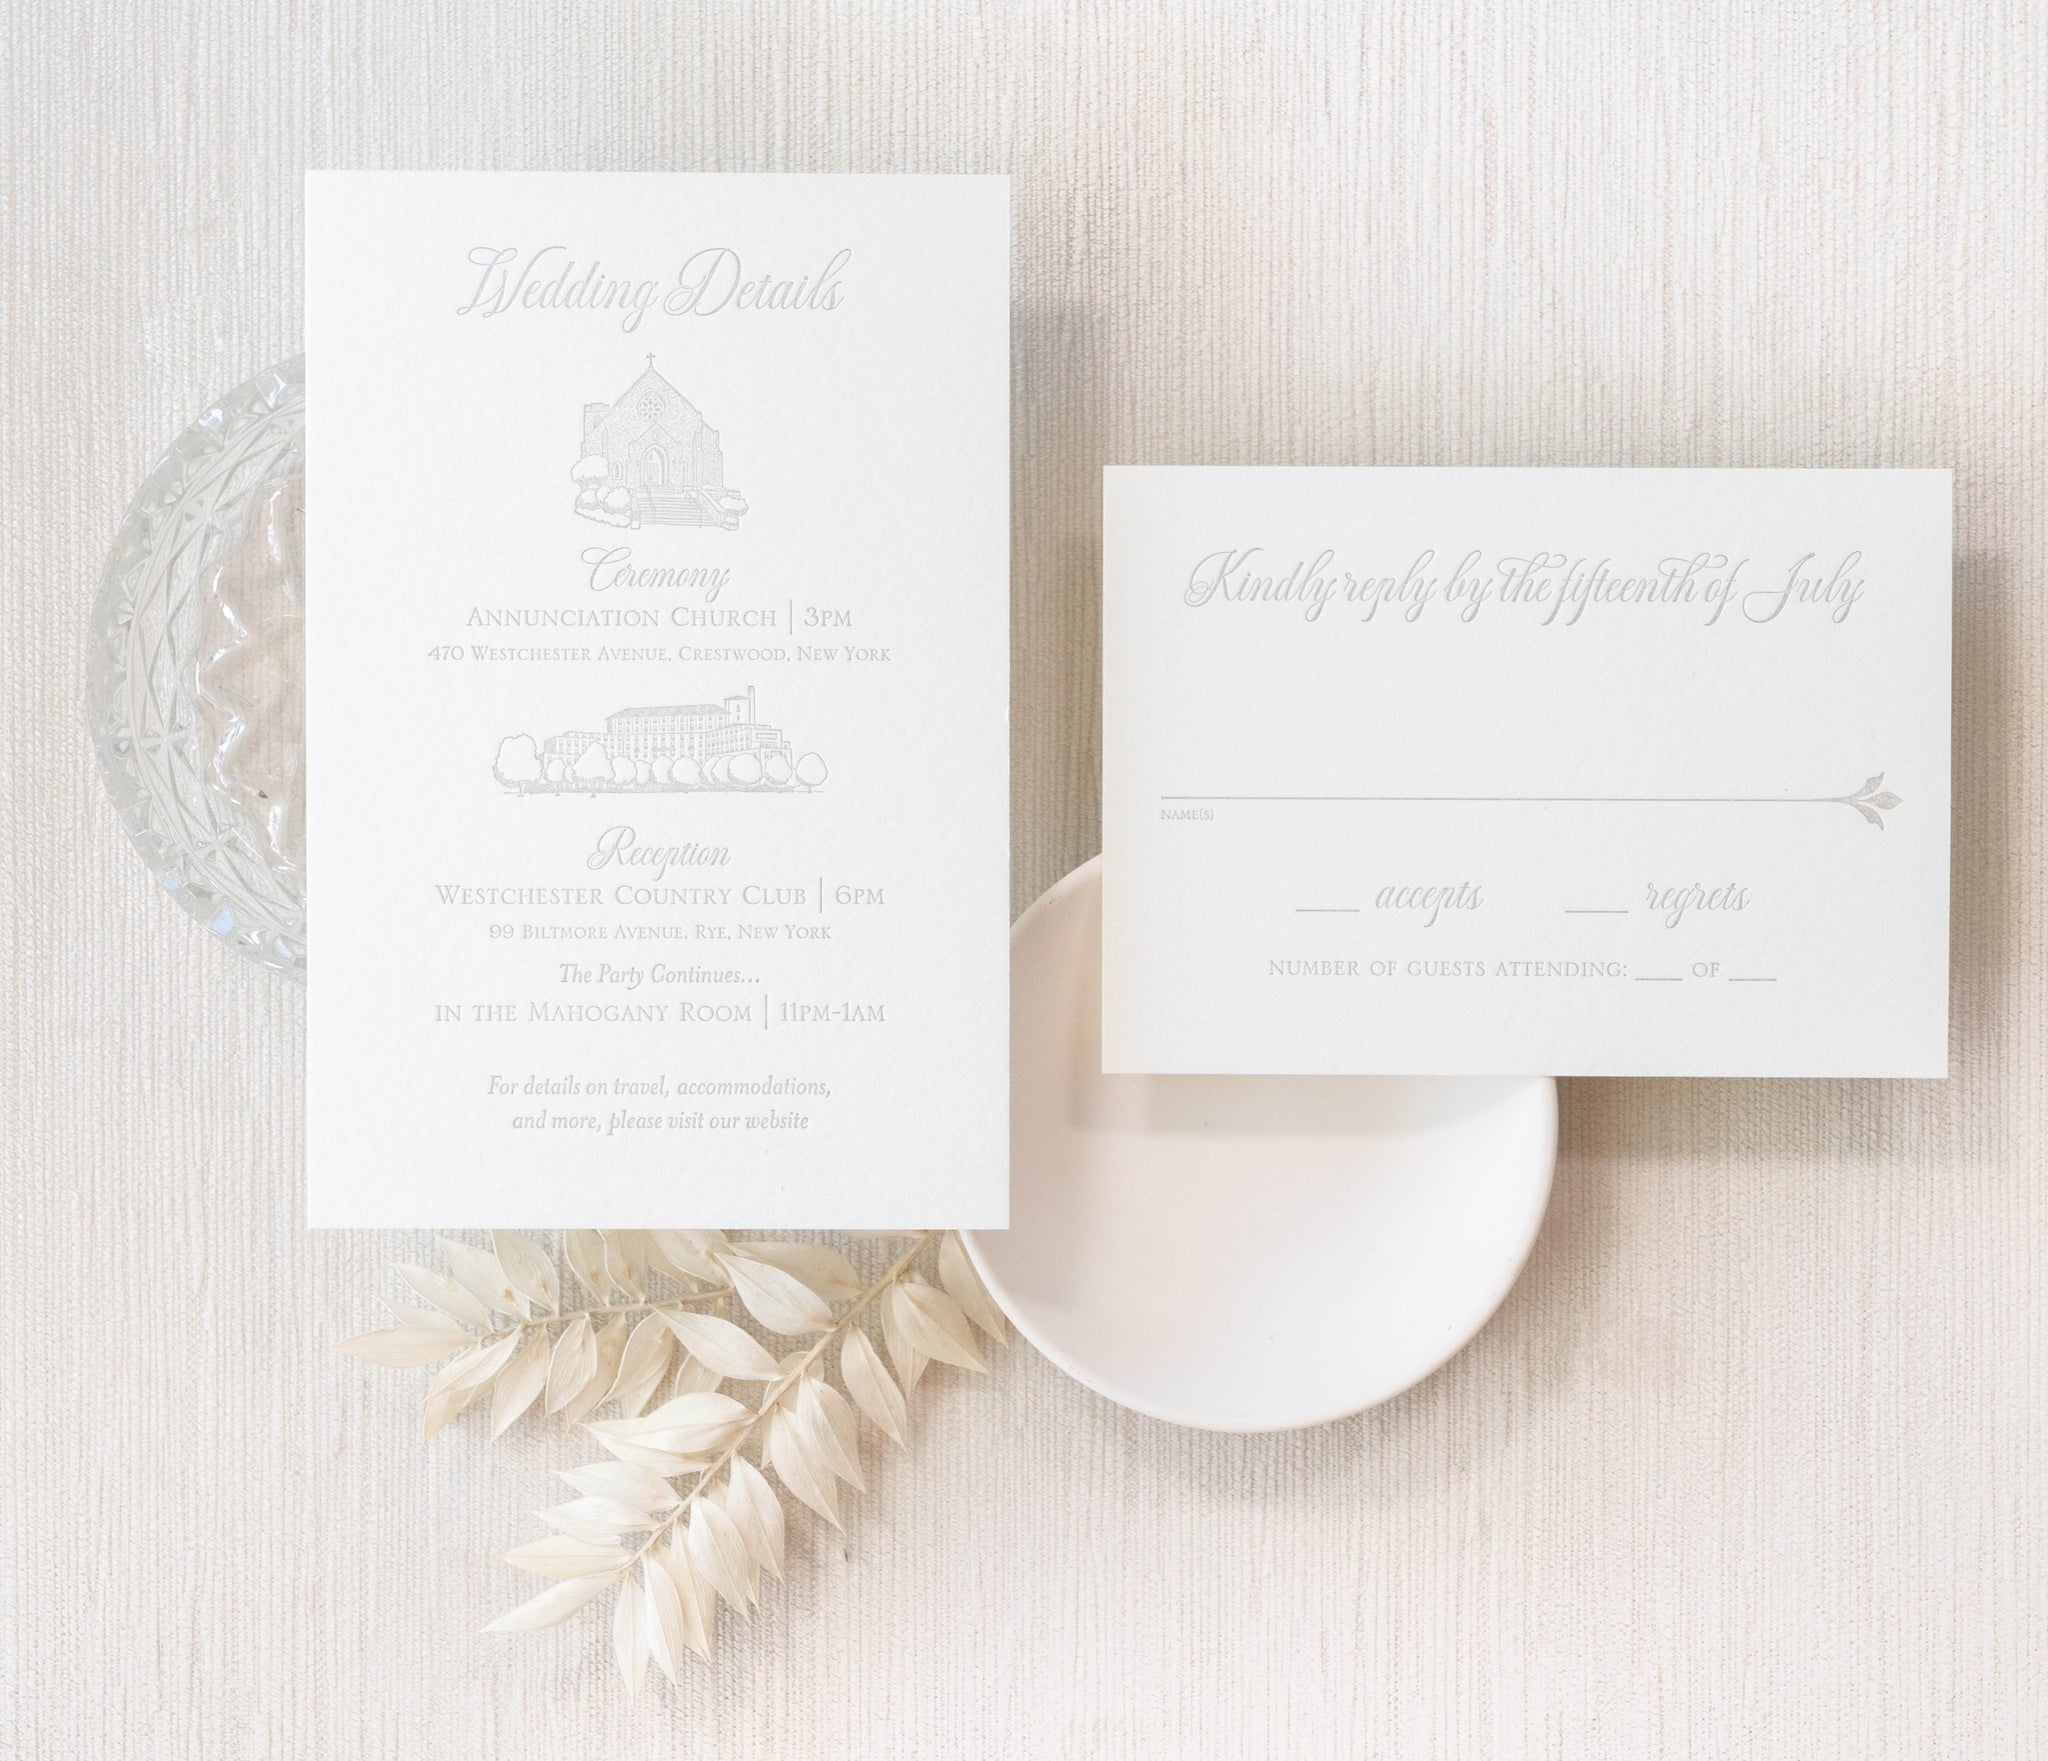 Letterpress wedding invitation with custom venue illustrations on detail card and accompanying reply card letterpress printed in soft taupe ink onto thick white cotton paper stock